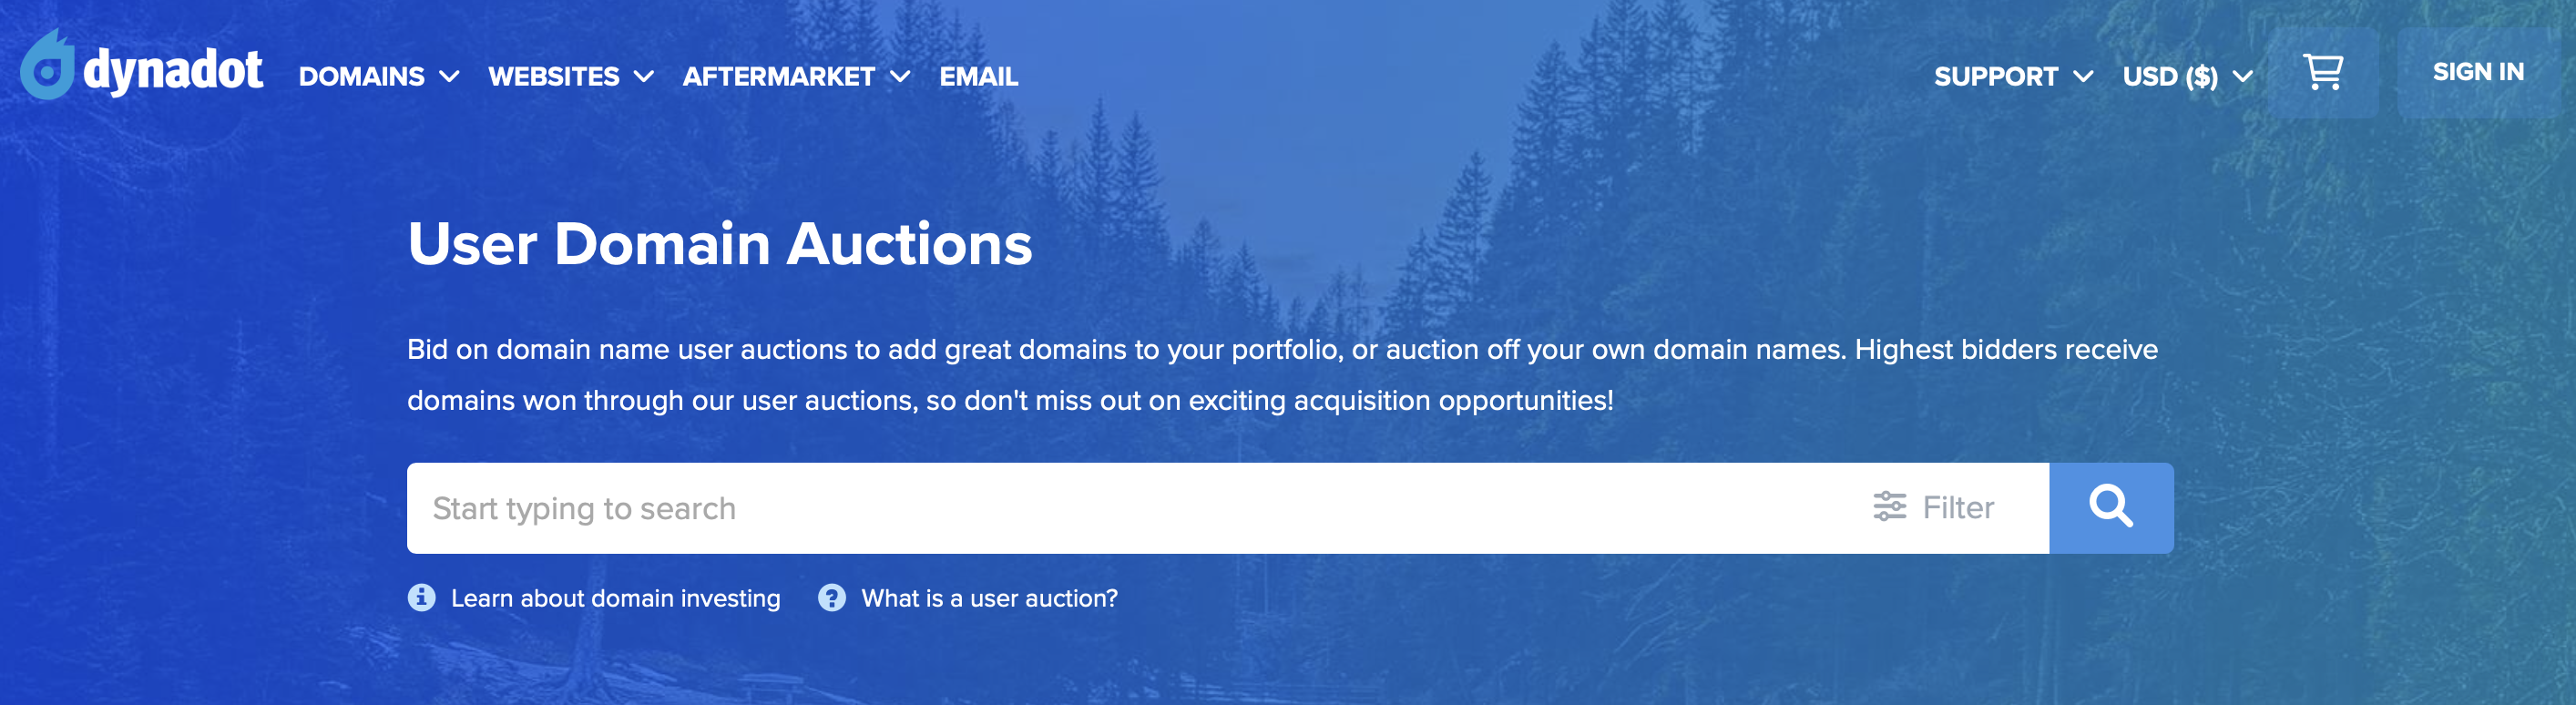 Landing page for User Auctions on Dynadot